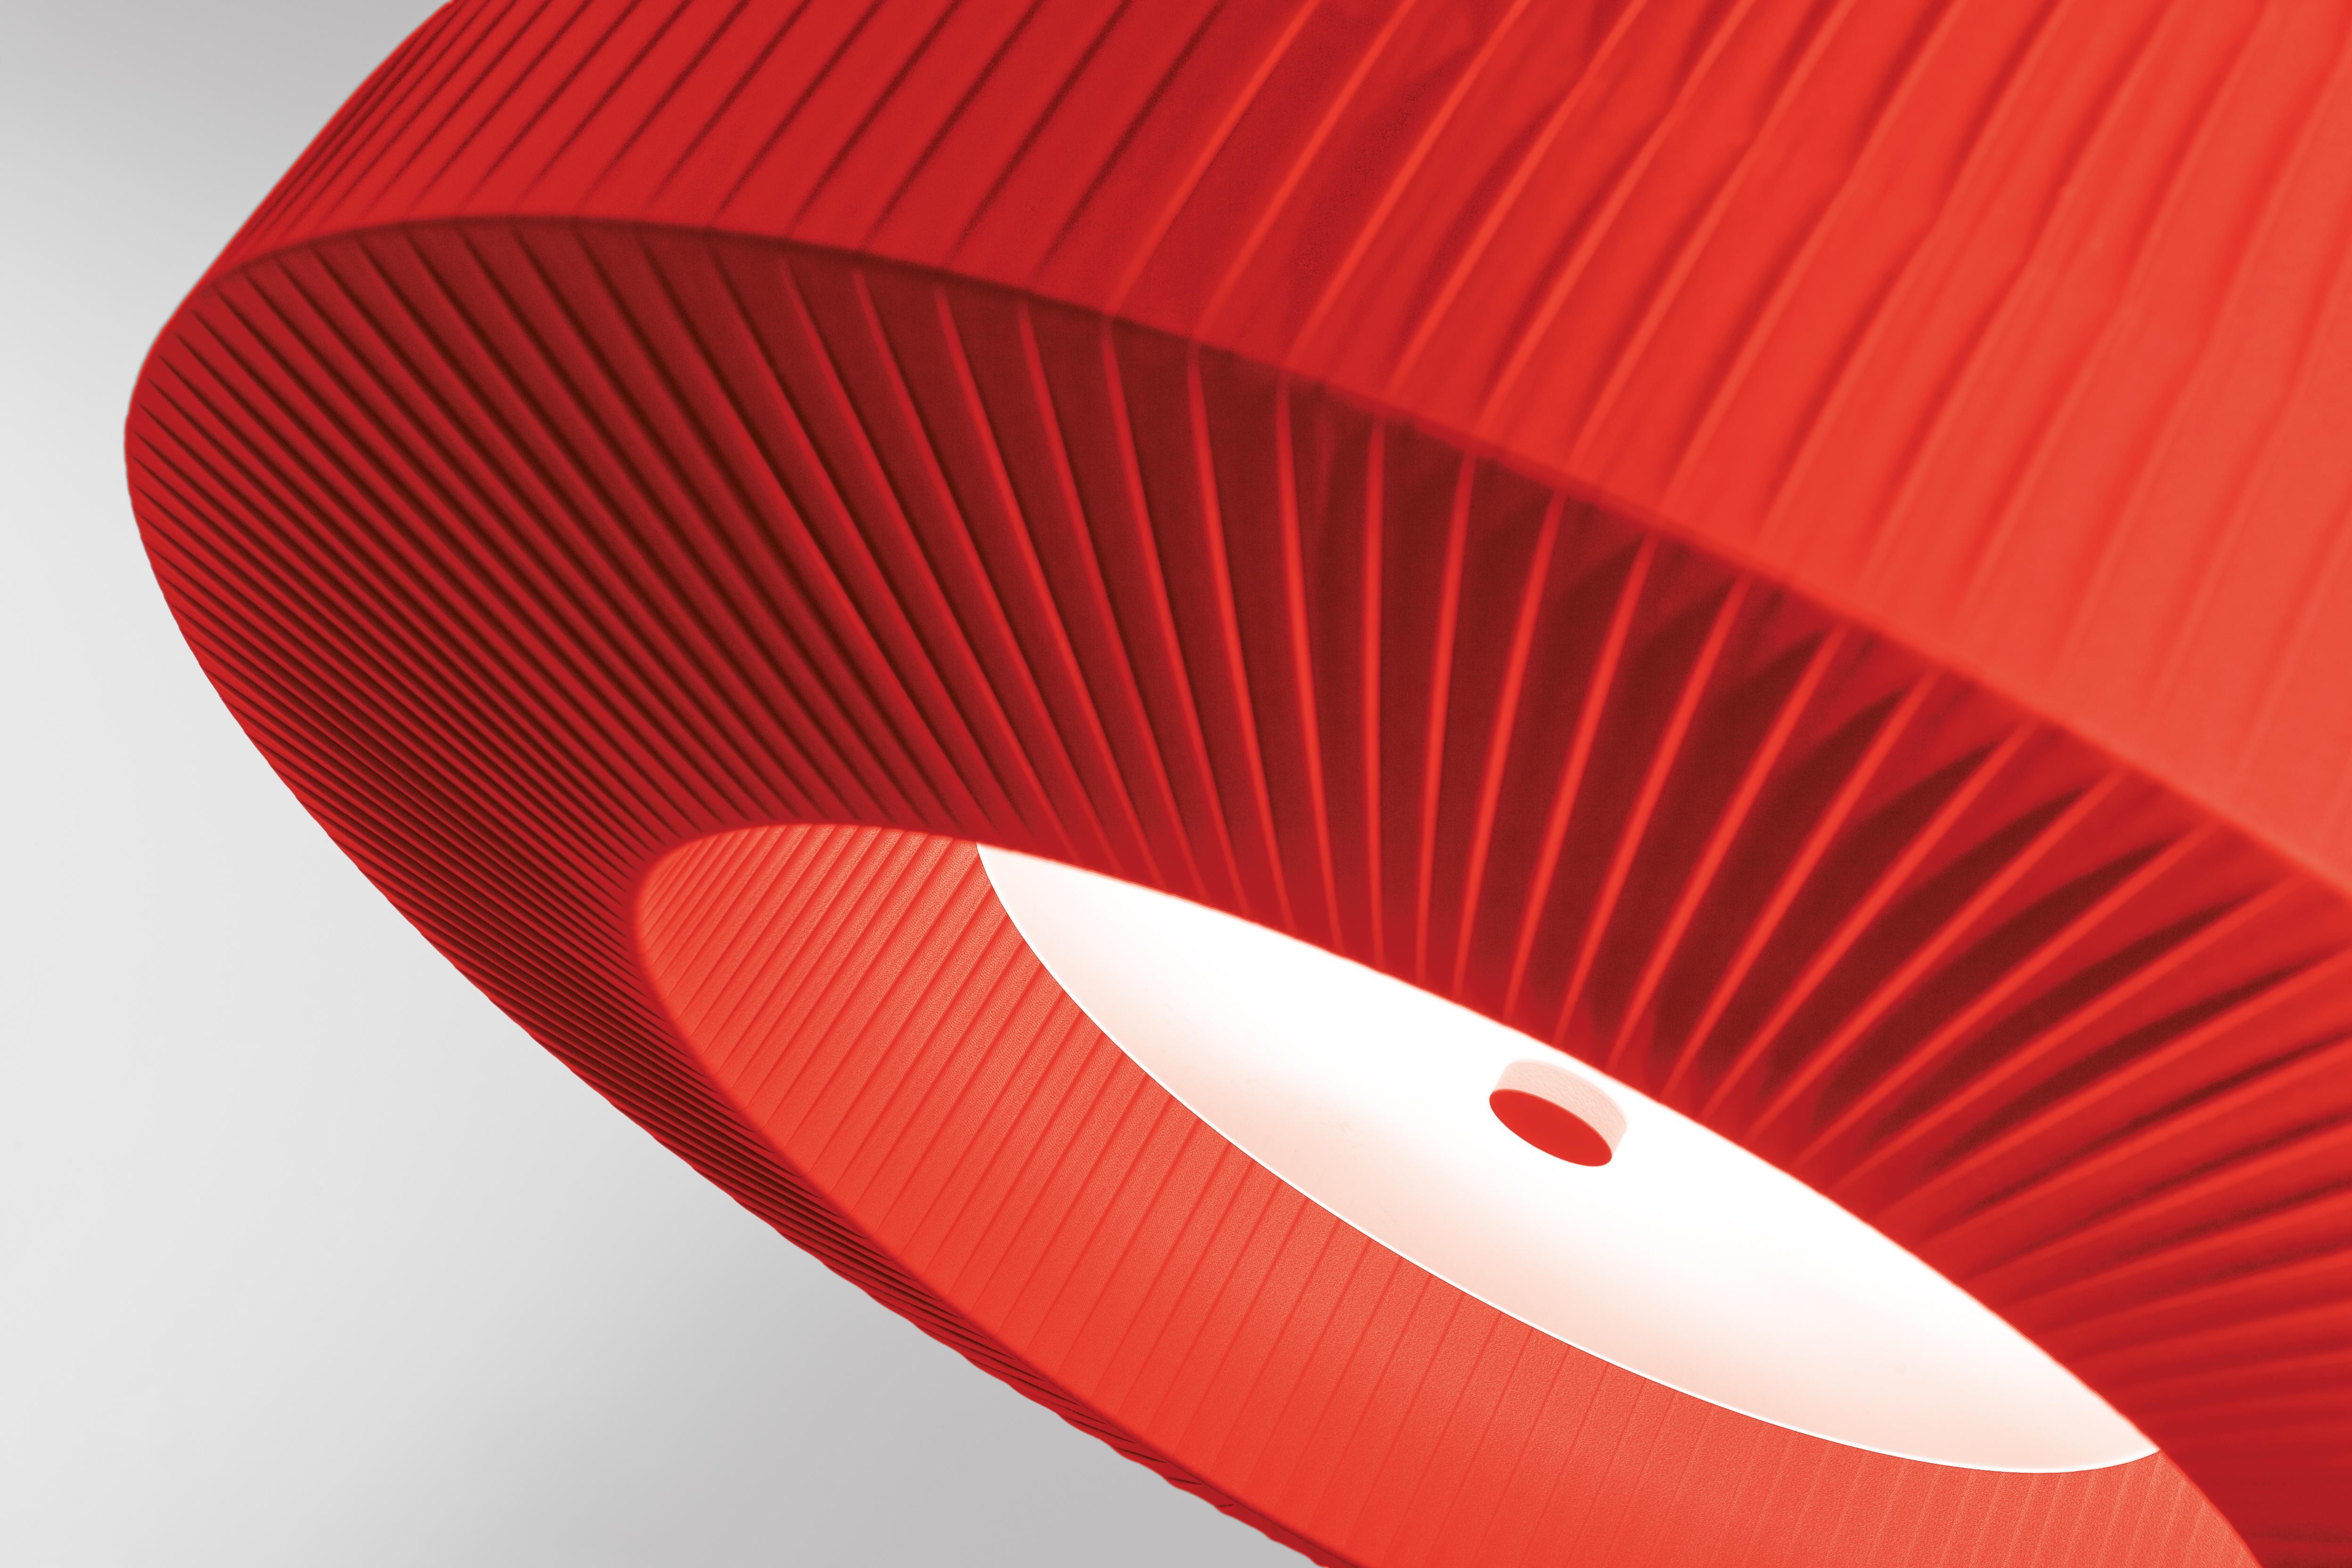 Axolight Bell Medium Pendant Lamp in Red by Manuel & Vanessa Vivian

The ceiling version of Bell is in continuity with the aesthetic of the pendant one. The lightness given by the fabric, the multidimensionality and the chromatic variations remain